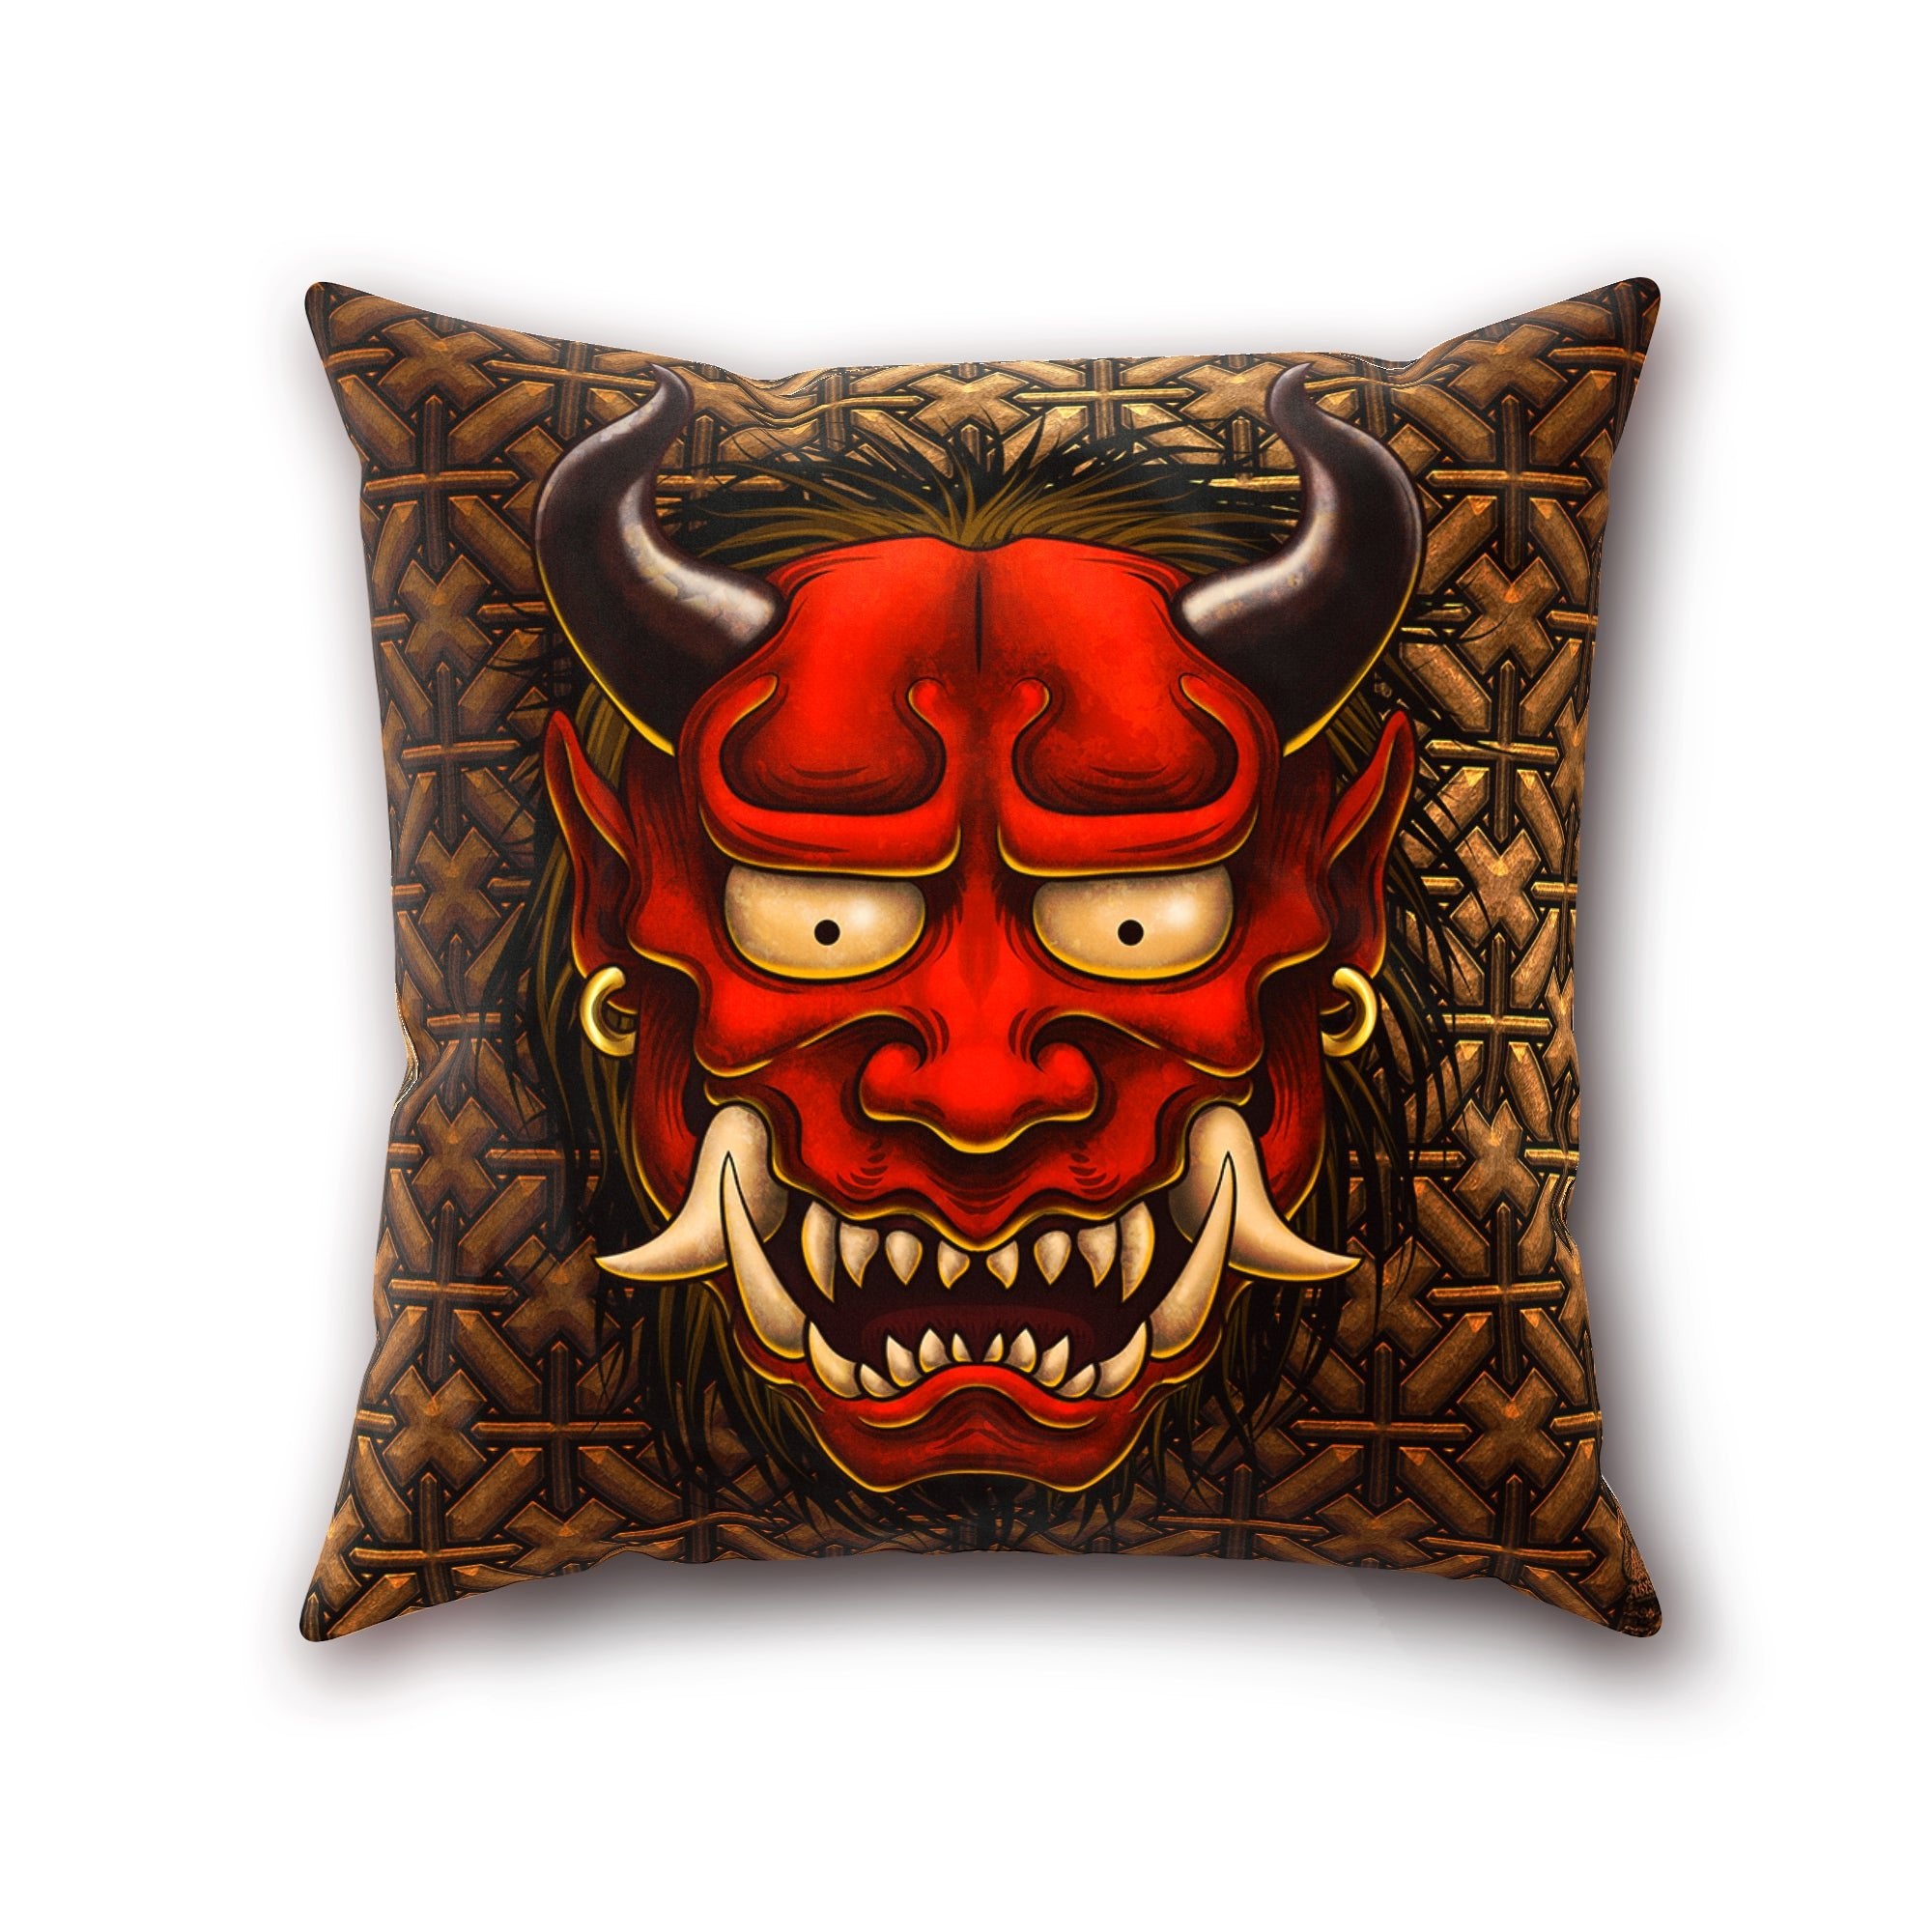 Oni Throw Pillow, Decorative Accent Pillow, Square Cushion Cover, Demon, Asia Decor - Original White or Red, 2 Colors - Abysm Internal